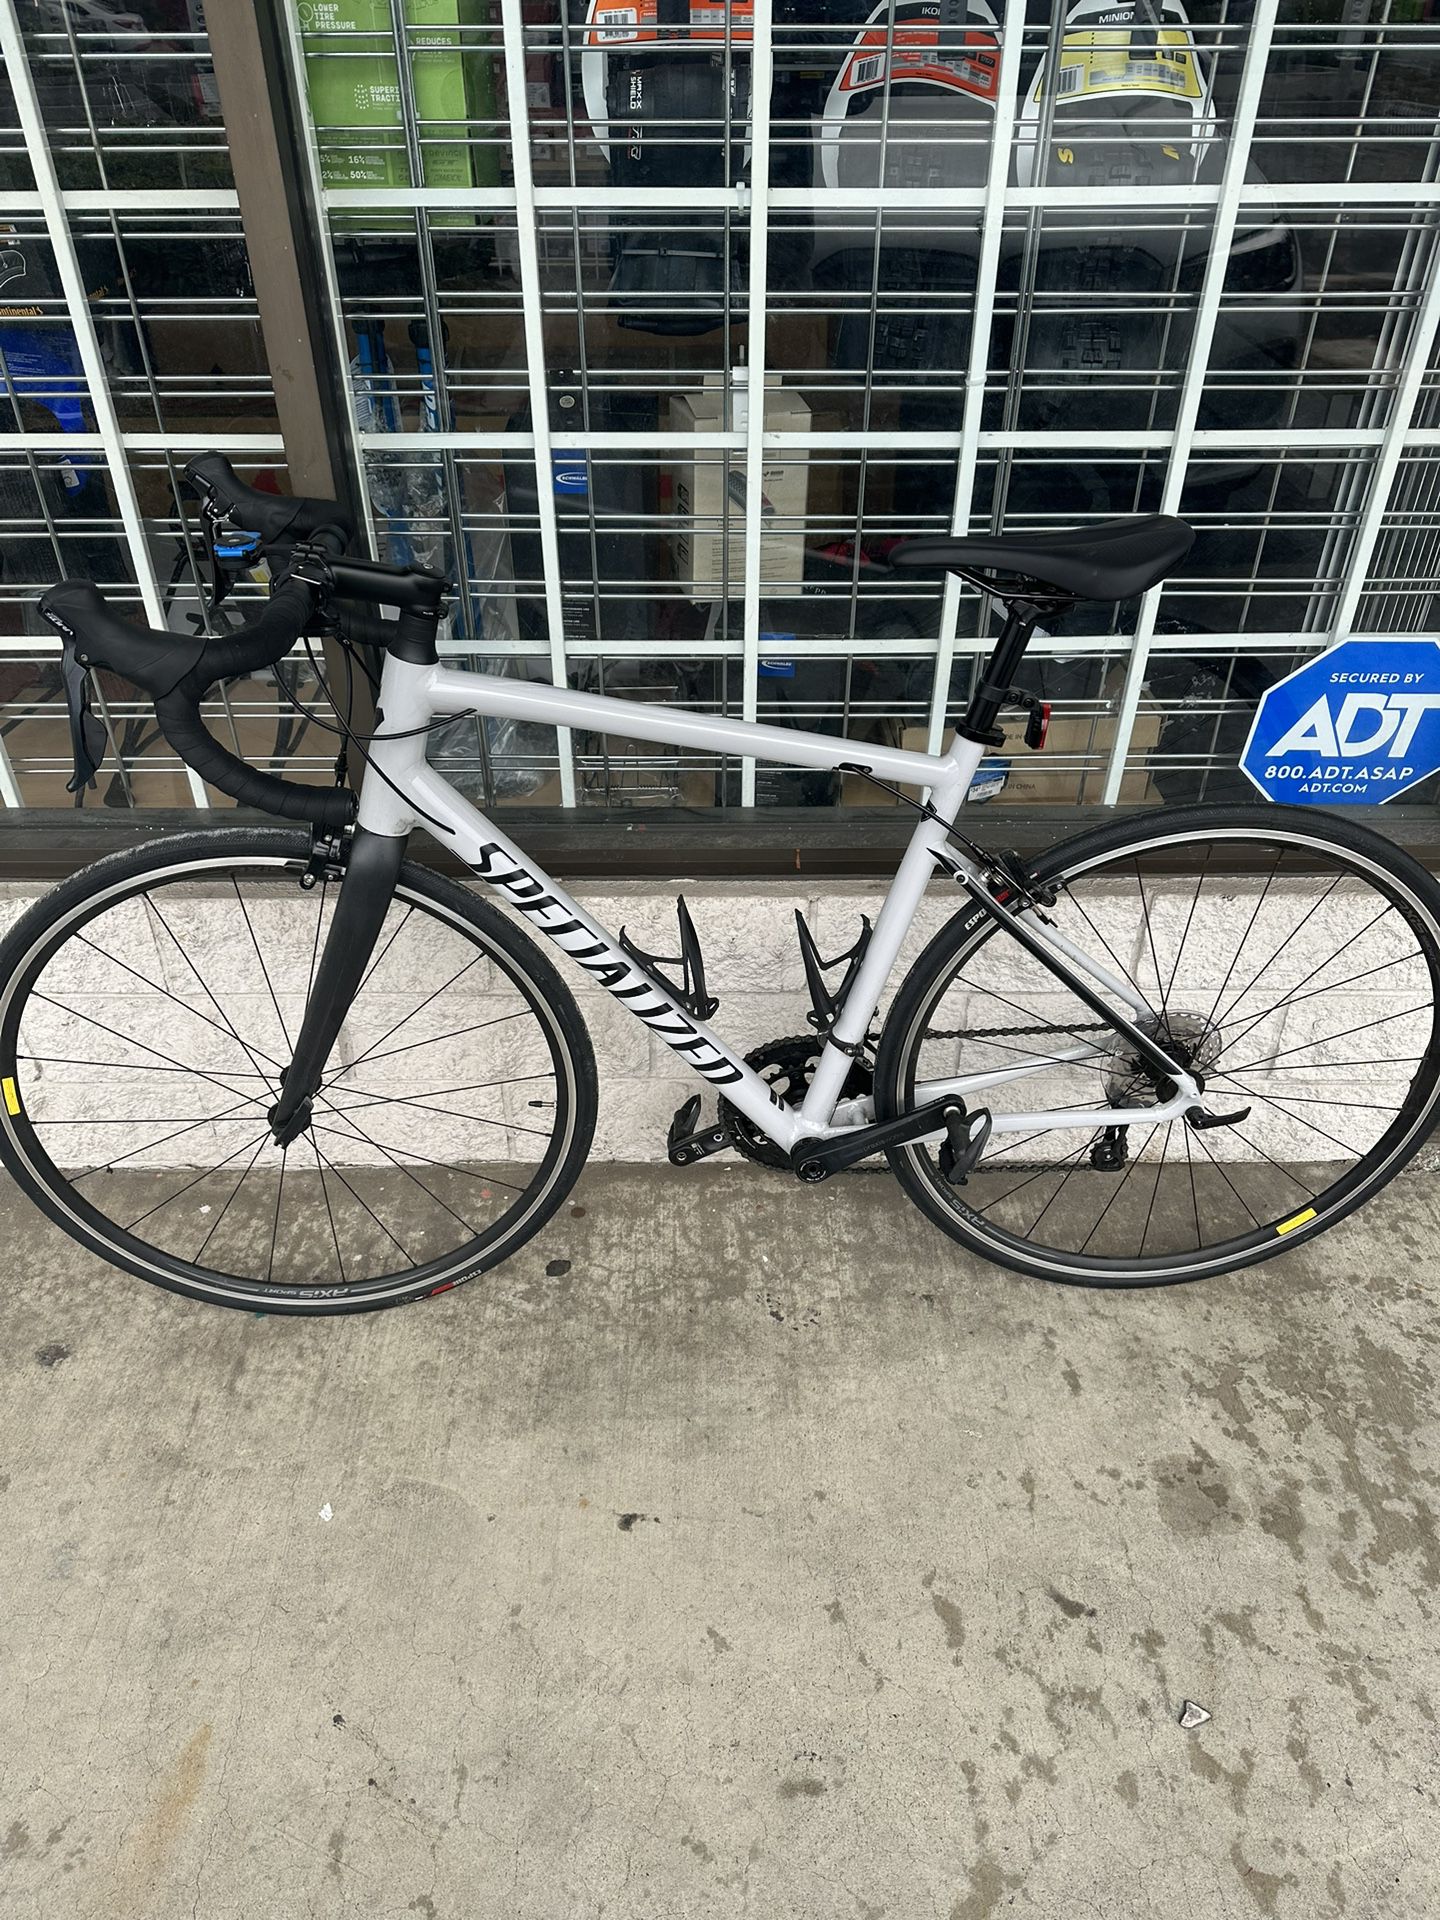 2020 Specialized Allez Sport E5 for Sale in Lakewood, CA - OfferUp